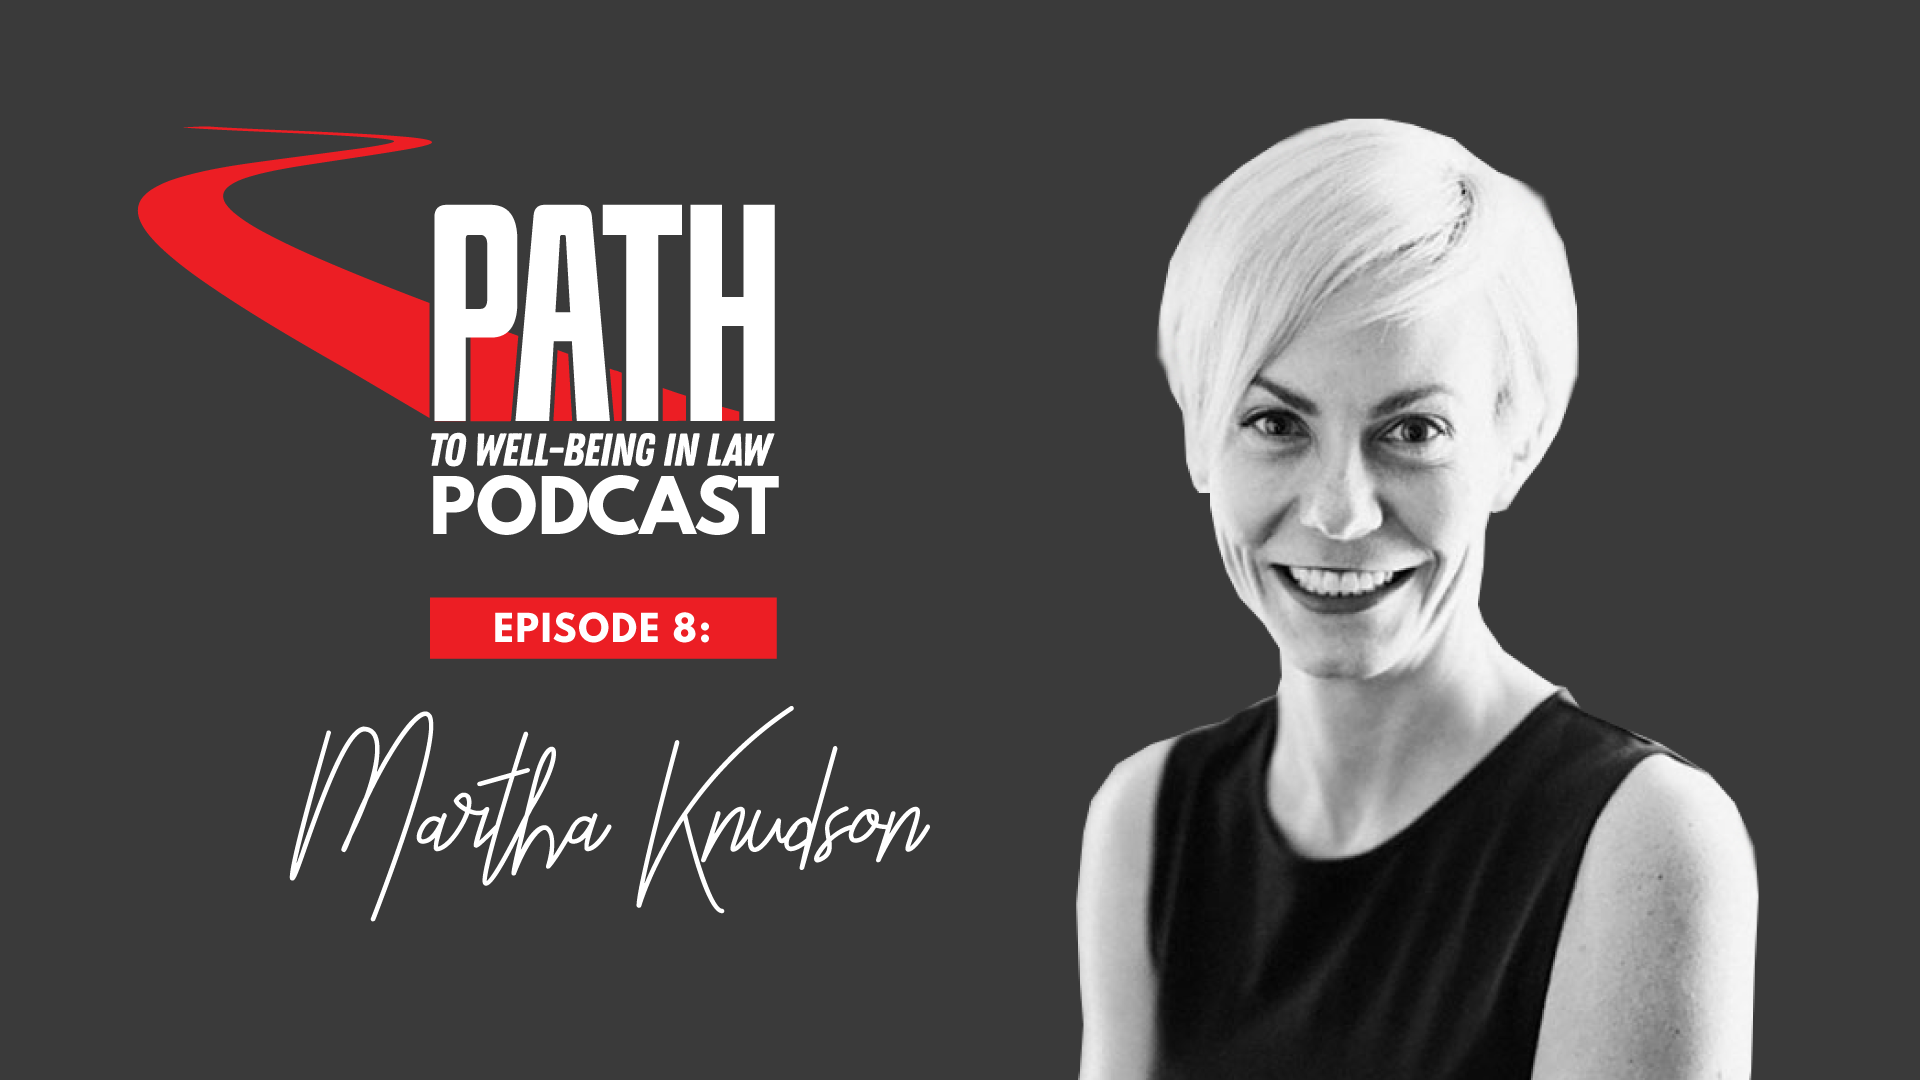 Path To Well-Being In Law Podcast: Episode 8 - Martha Knudson